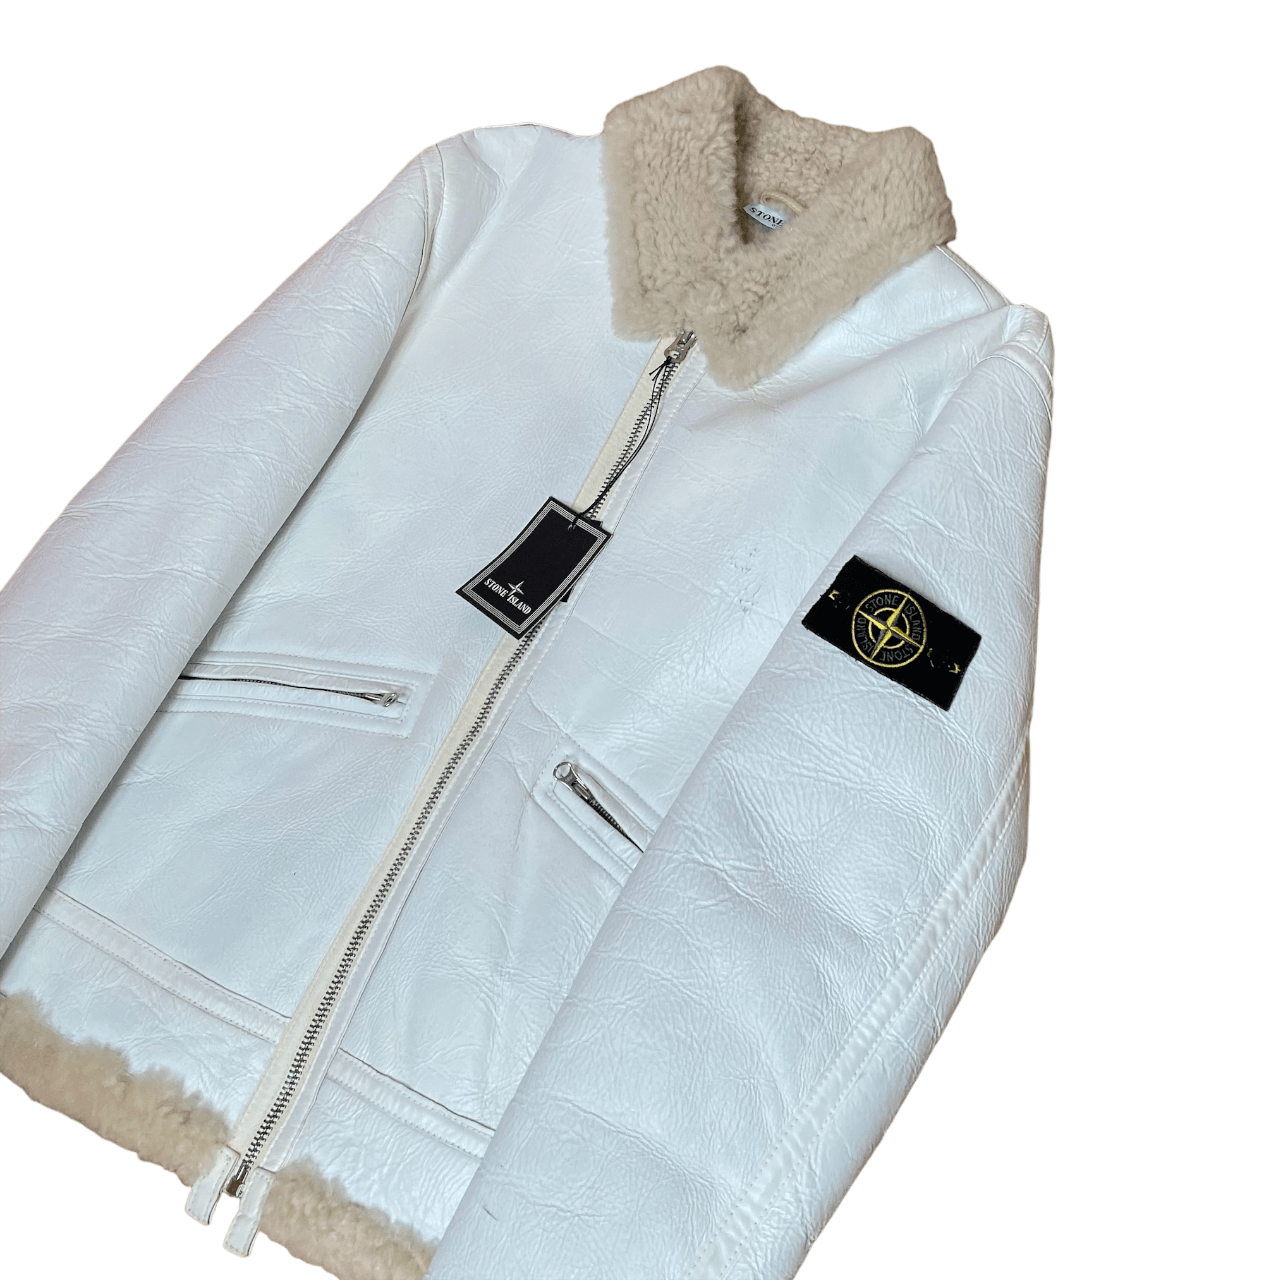 STONE ISLAND AW 2006 Hand Painted Sheepskin Leather Jacket - Known Source